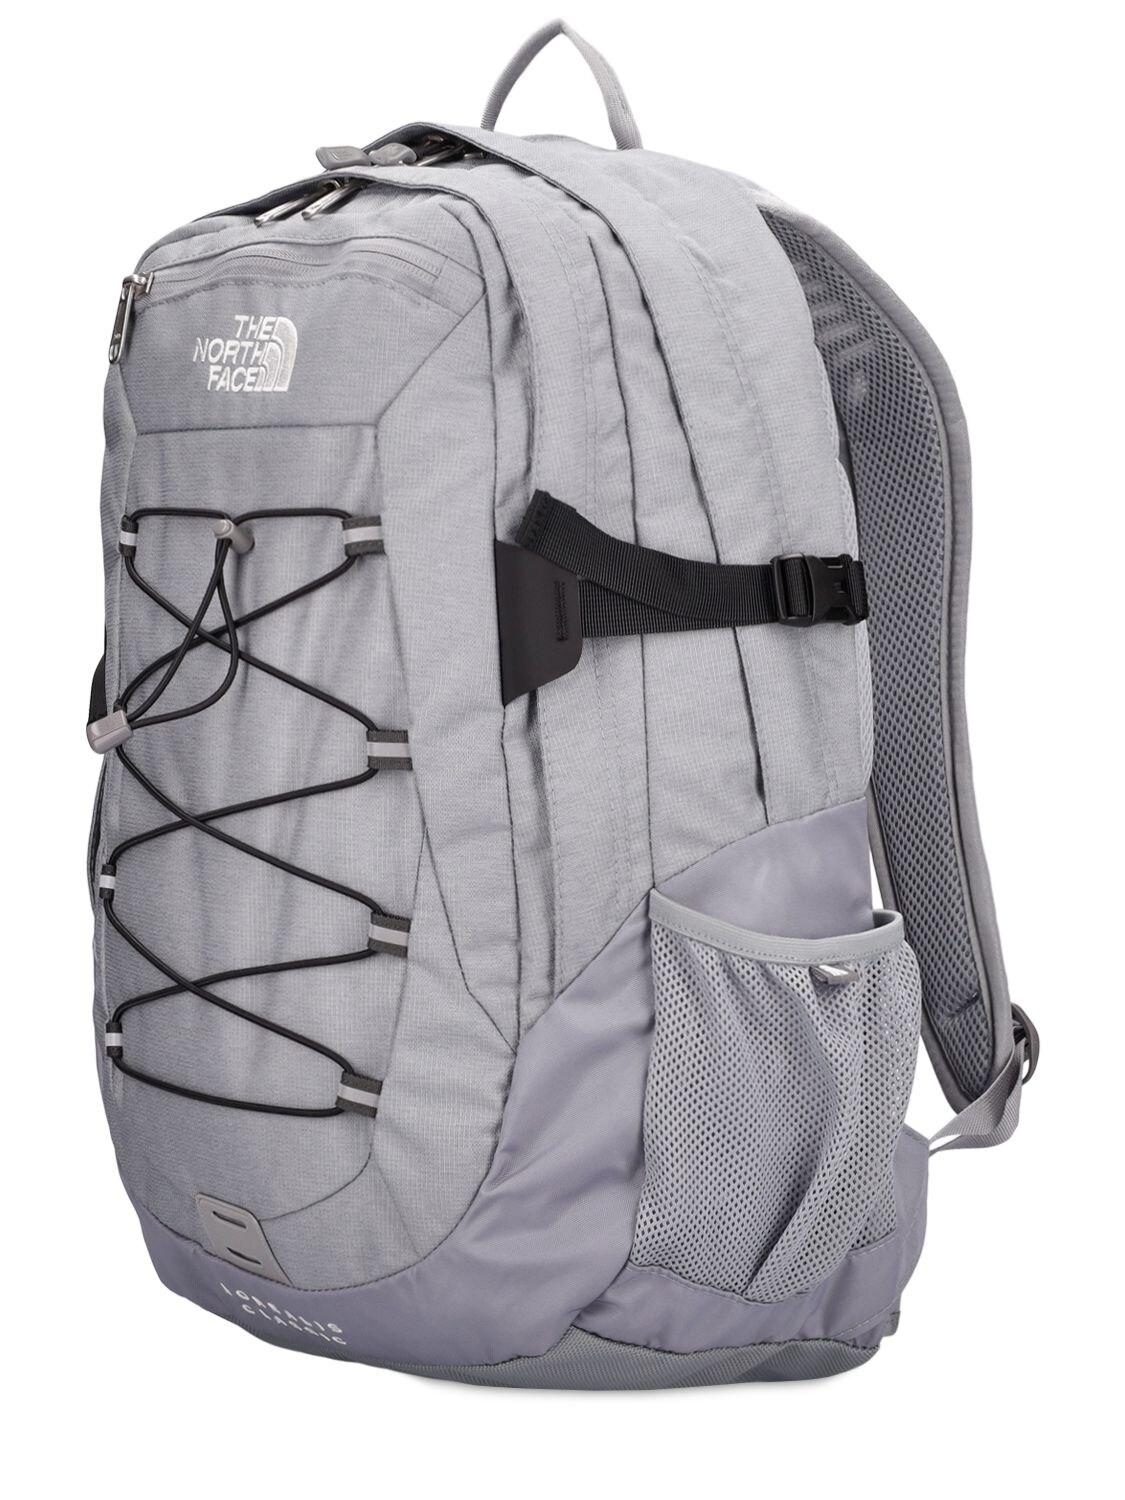 The North Face 29l Borealis Classic Nylon Backpack in Gray | Lyst